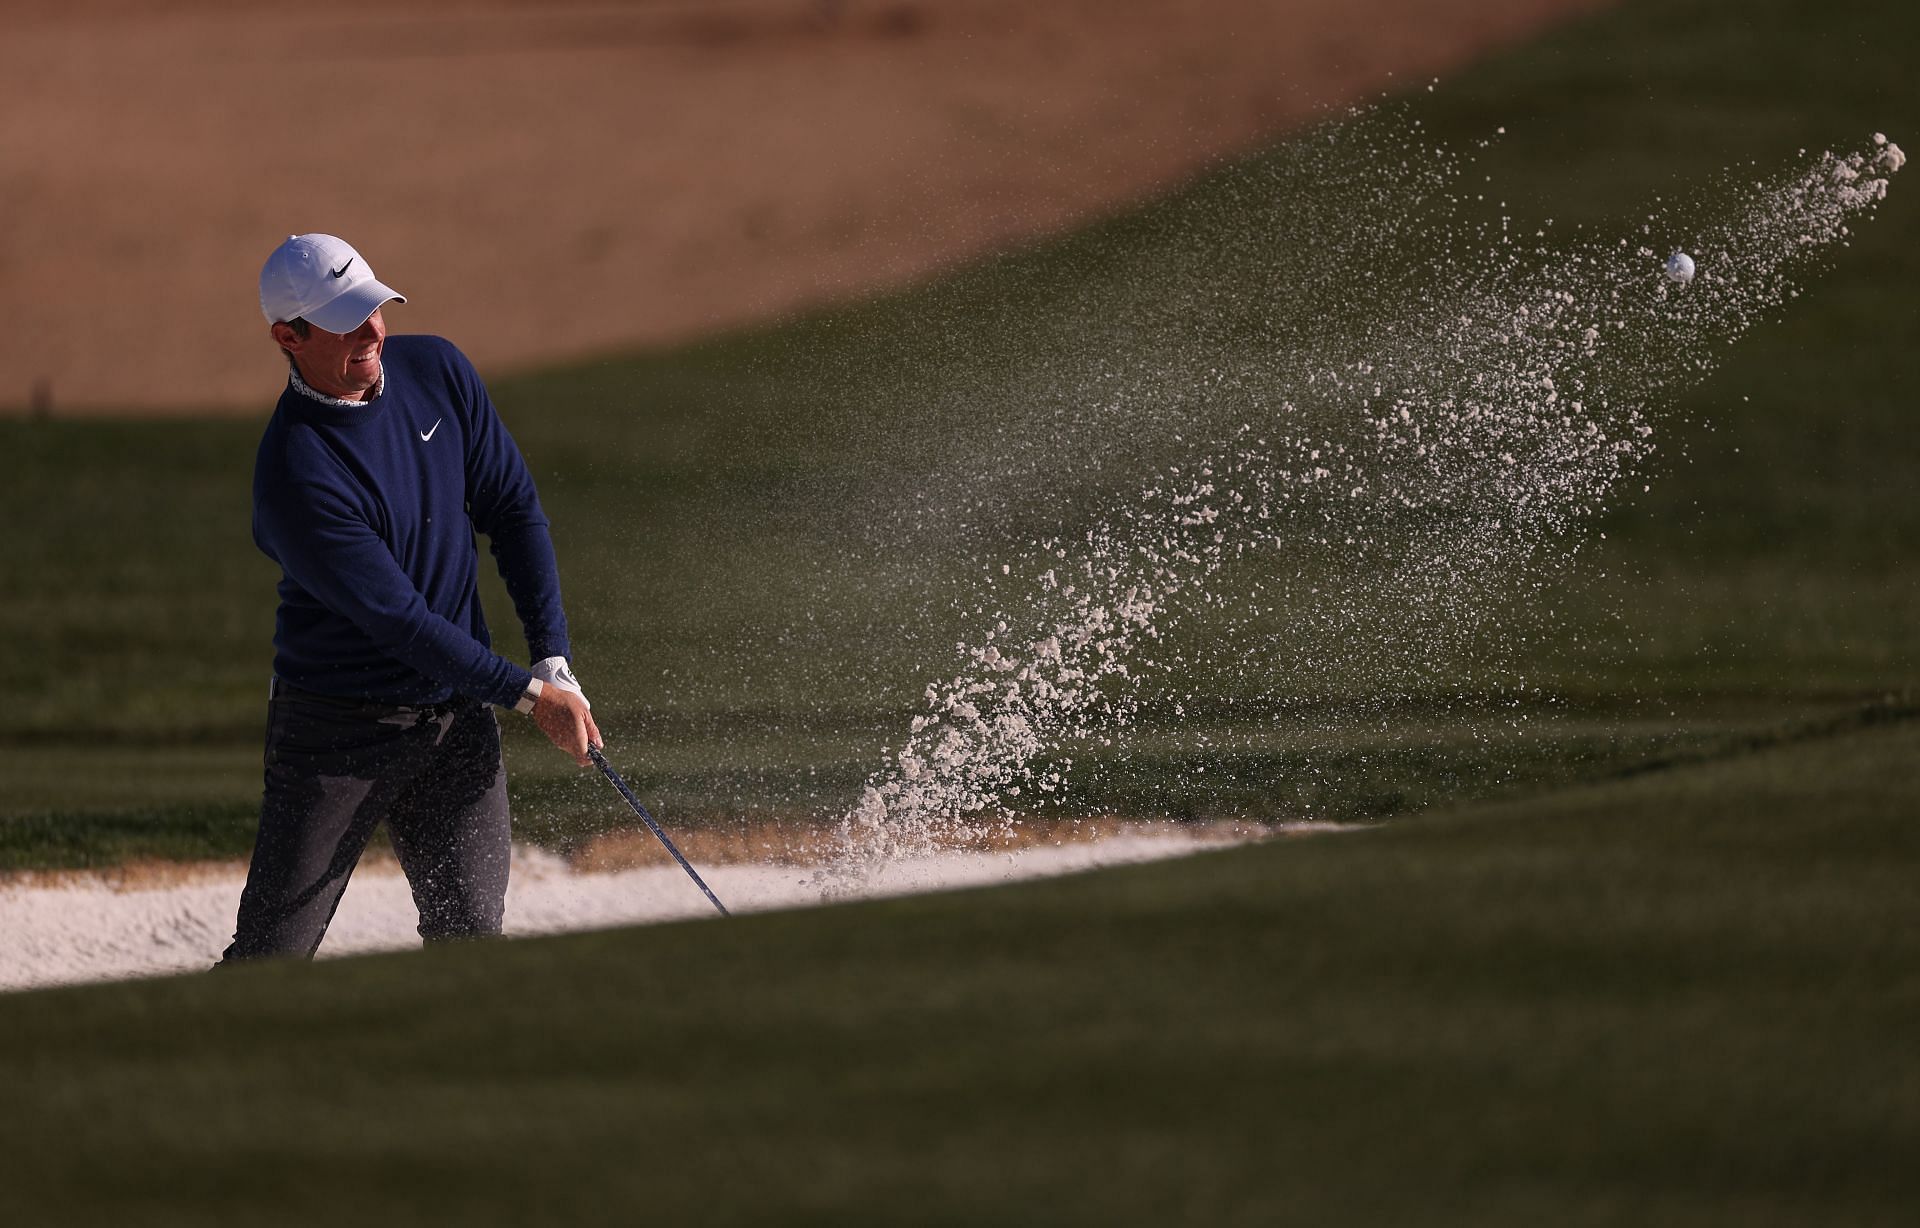 Rory McIlroy at the WM Phoenix Open - Final Round (Image via Steph Chambers/Getty Images)